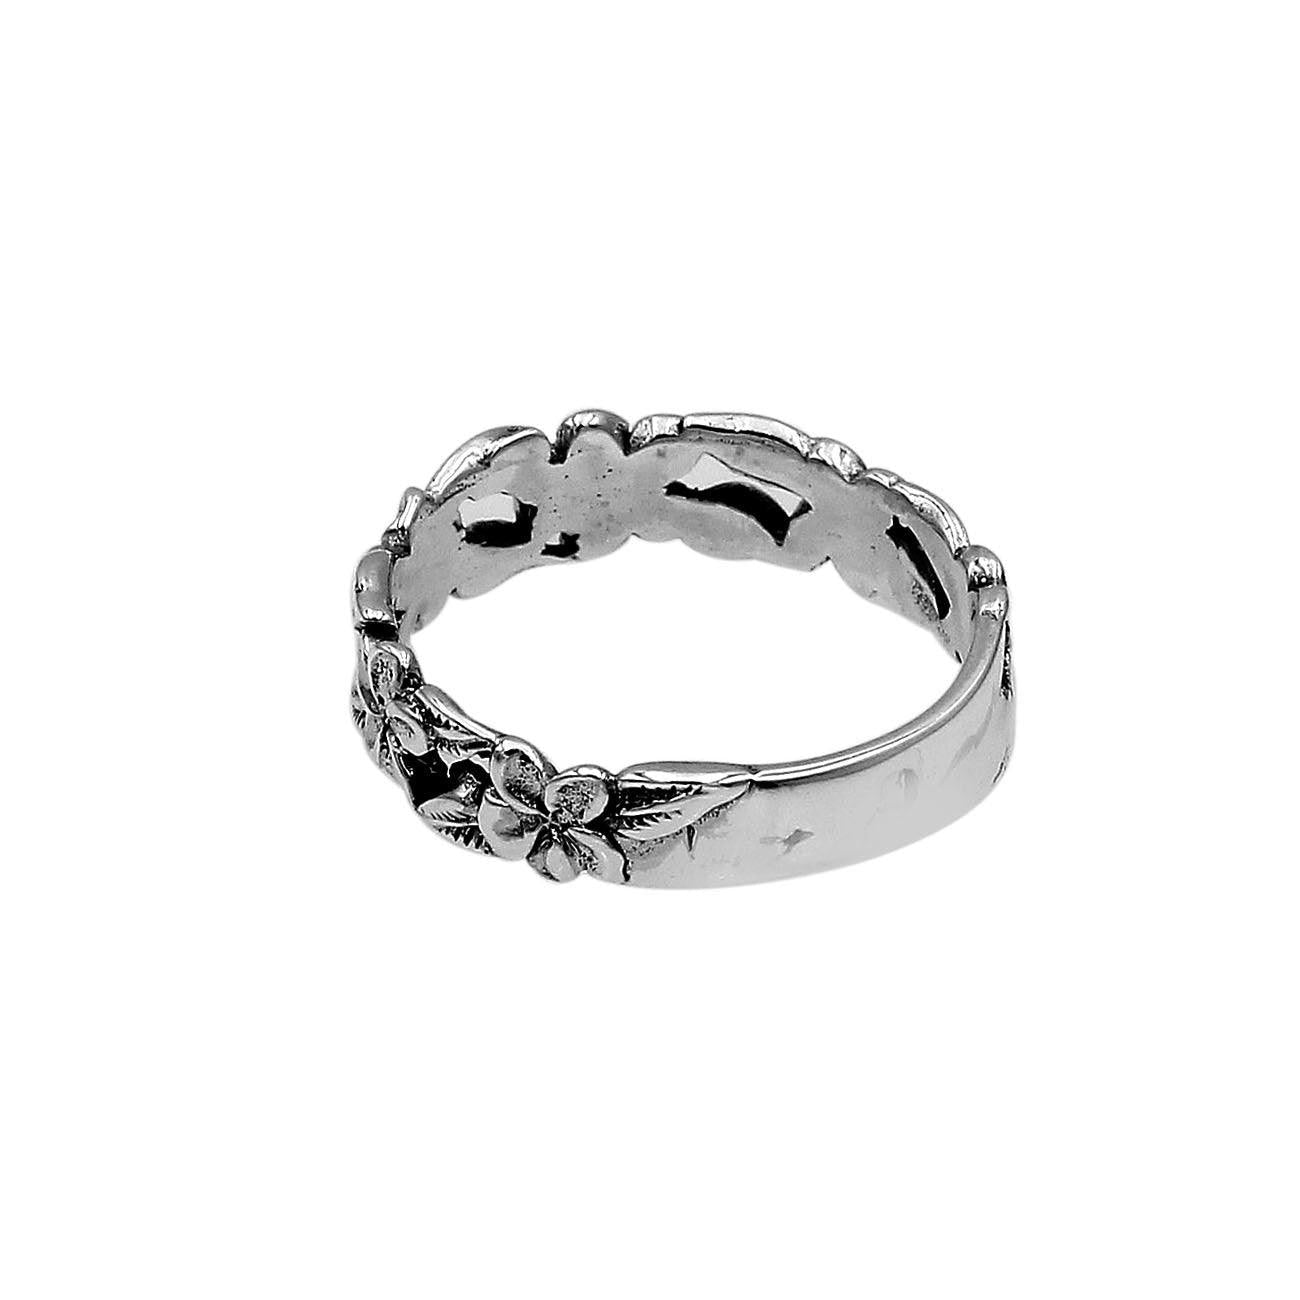 Handmade BALI Frangipani Floral BAND Ring in 925 Sterling Silver - Size L , M , N , O , P , Q - Inspiring Jewellery